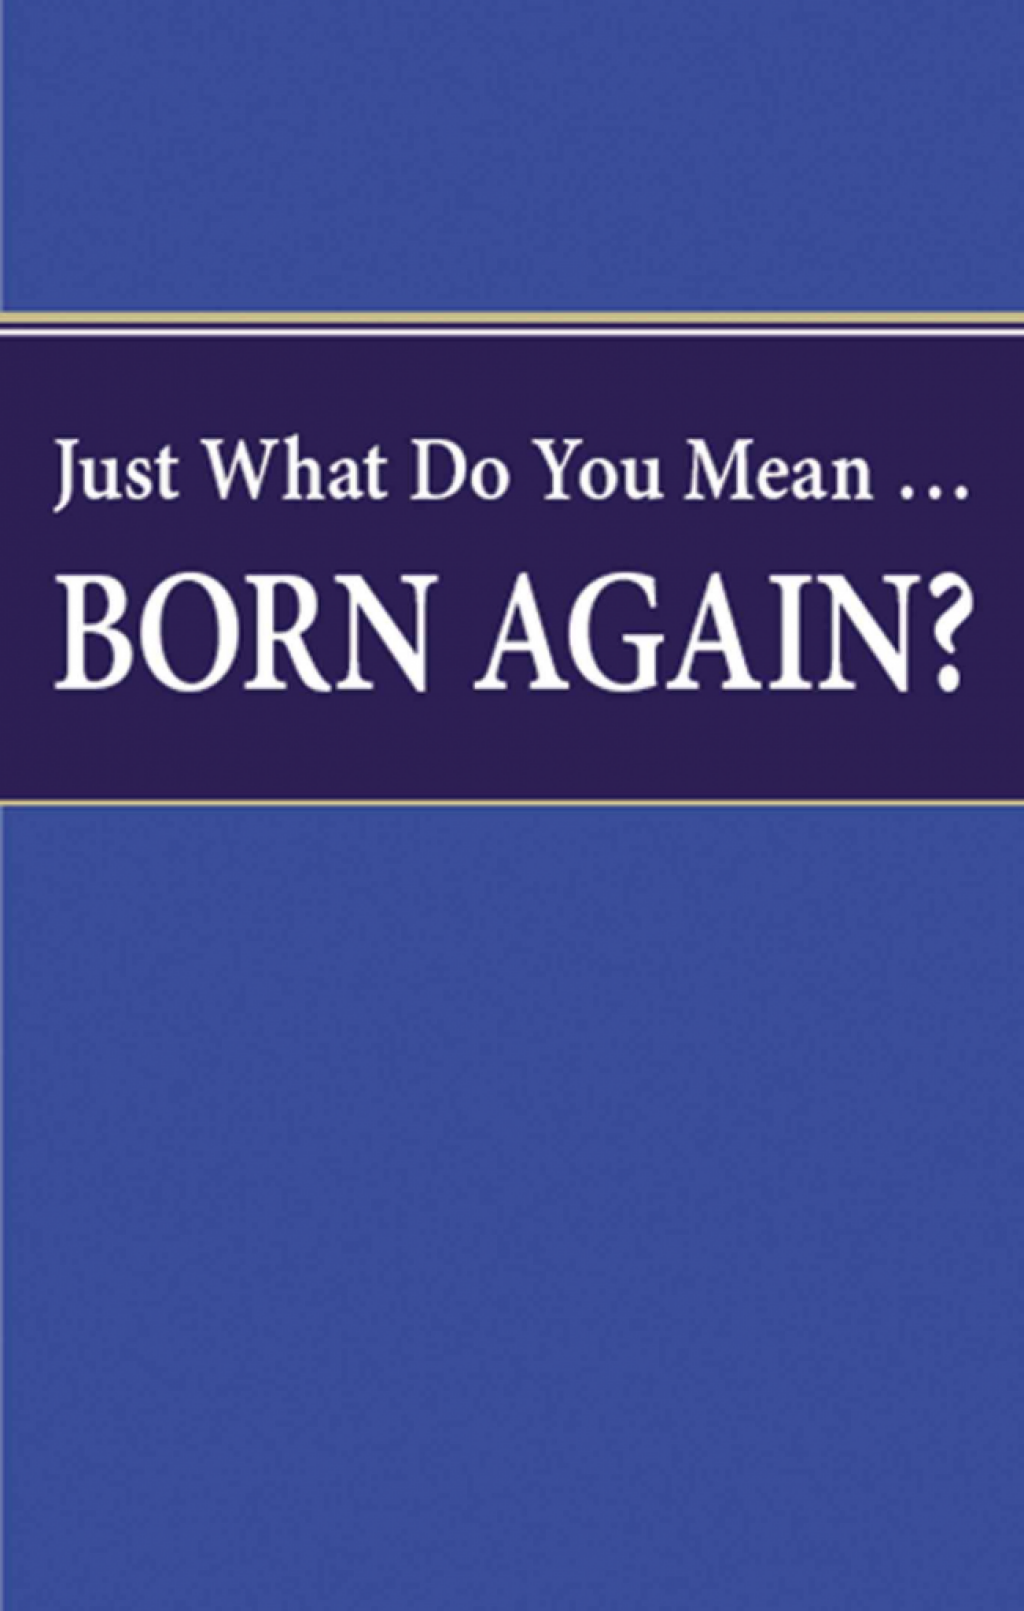 just-what-do-you-mean-born-again-thetrumpet